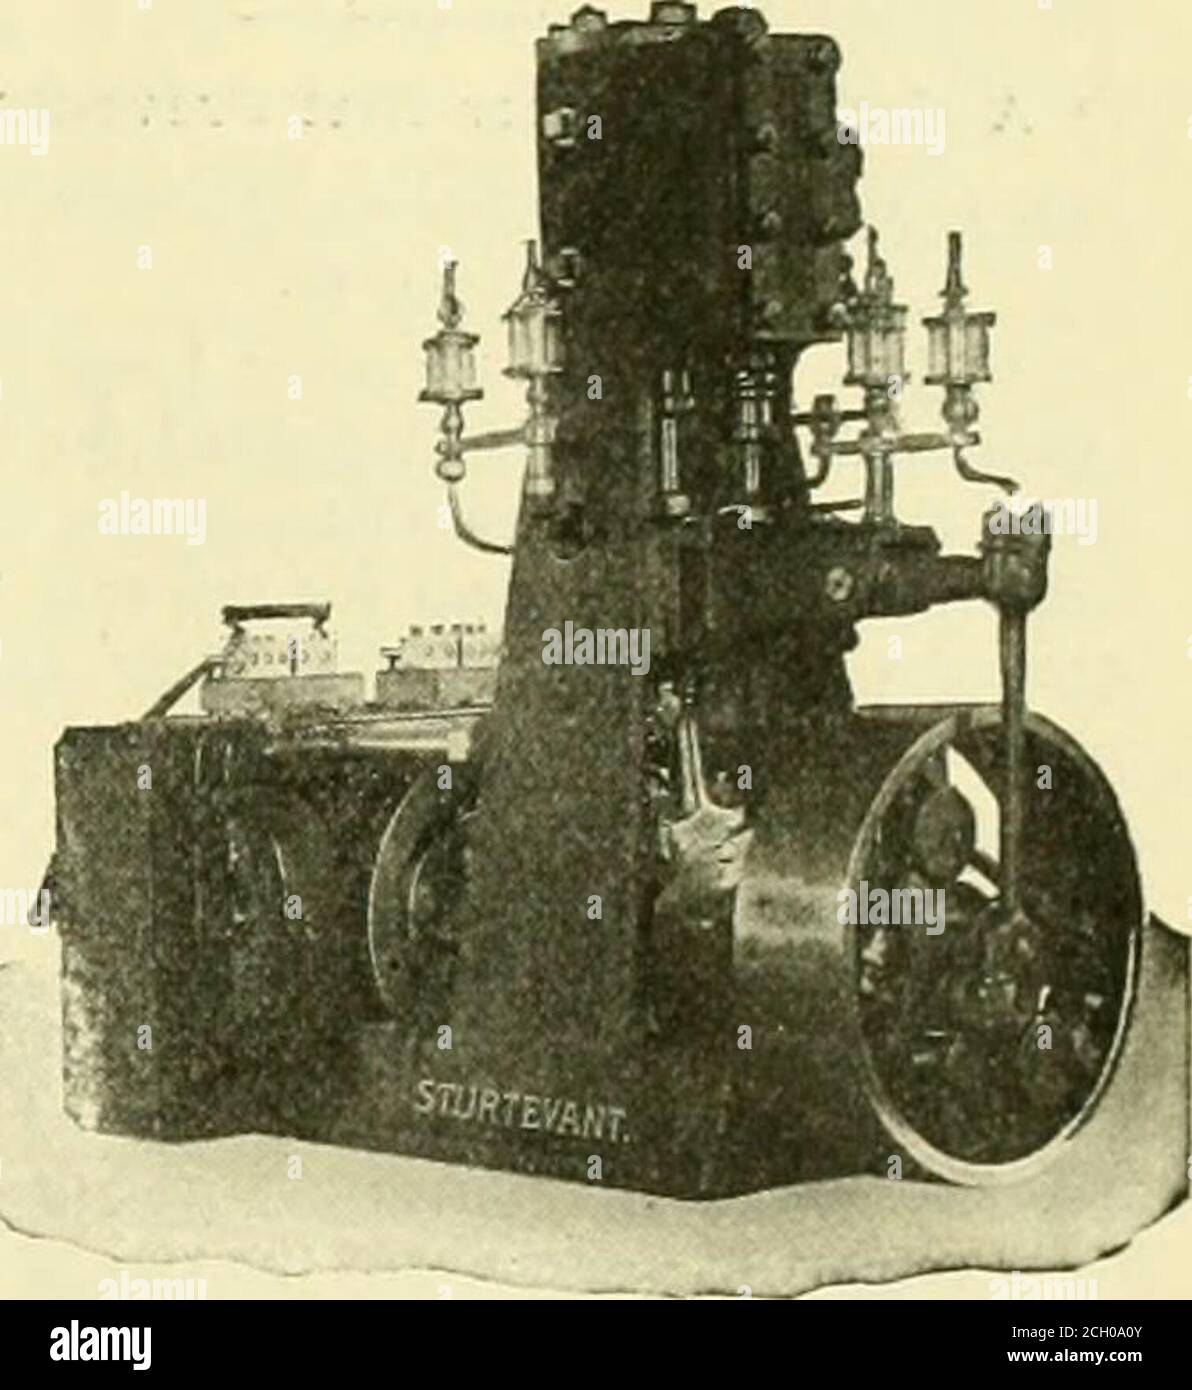 . Railway and locomotive engineering : a practical journal of railway motive power and rolling stock . ing purposes, and built bythe B. F. Sturtevant Company, of Boston,^lass. The engine has a cylinder 3 inchesin diameter and a stroke of 2/&lt; inches. It is self-contained, as is clearly indicated,and the speed is regulated by shaft gov-ernor. It has a piston valve, adjustablebearings, with direct-oiling devices. Aspeed of 300 revolutions per minute isattainable, and may be constantly main-tained with accurate regulation. The generator is of the 2^i-kilowattsize, designed to develop its rated Stock Photo